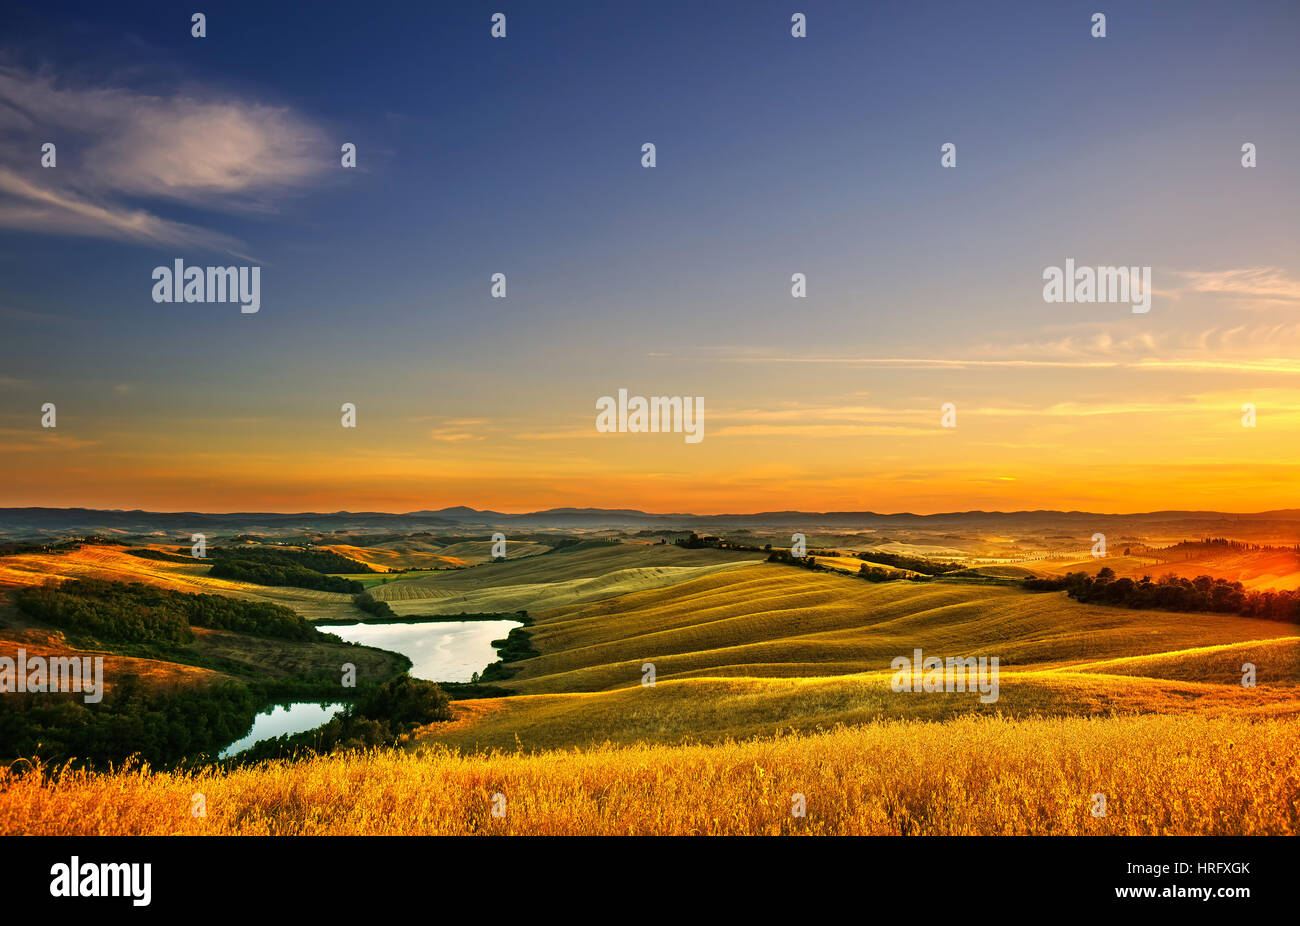 Tuscany, Crete Senesi landscape near Siena, Italy, europe. Small lake, green and yellow fields, blue sky with clouds. Stock Photo